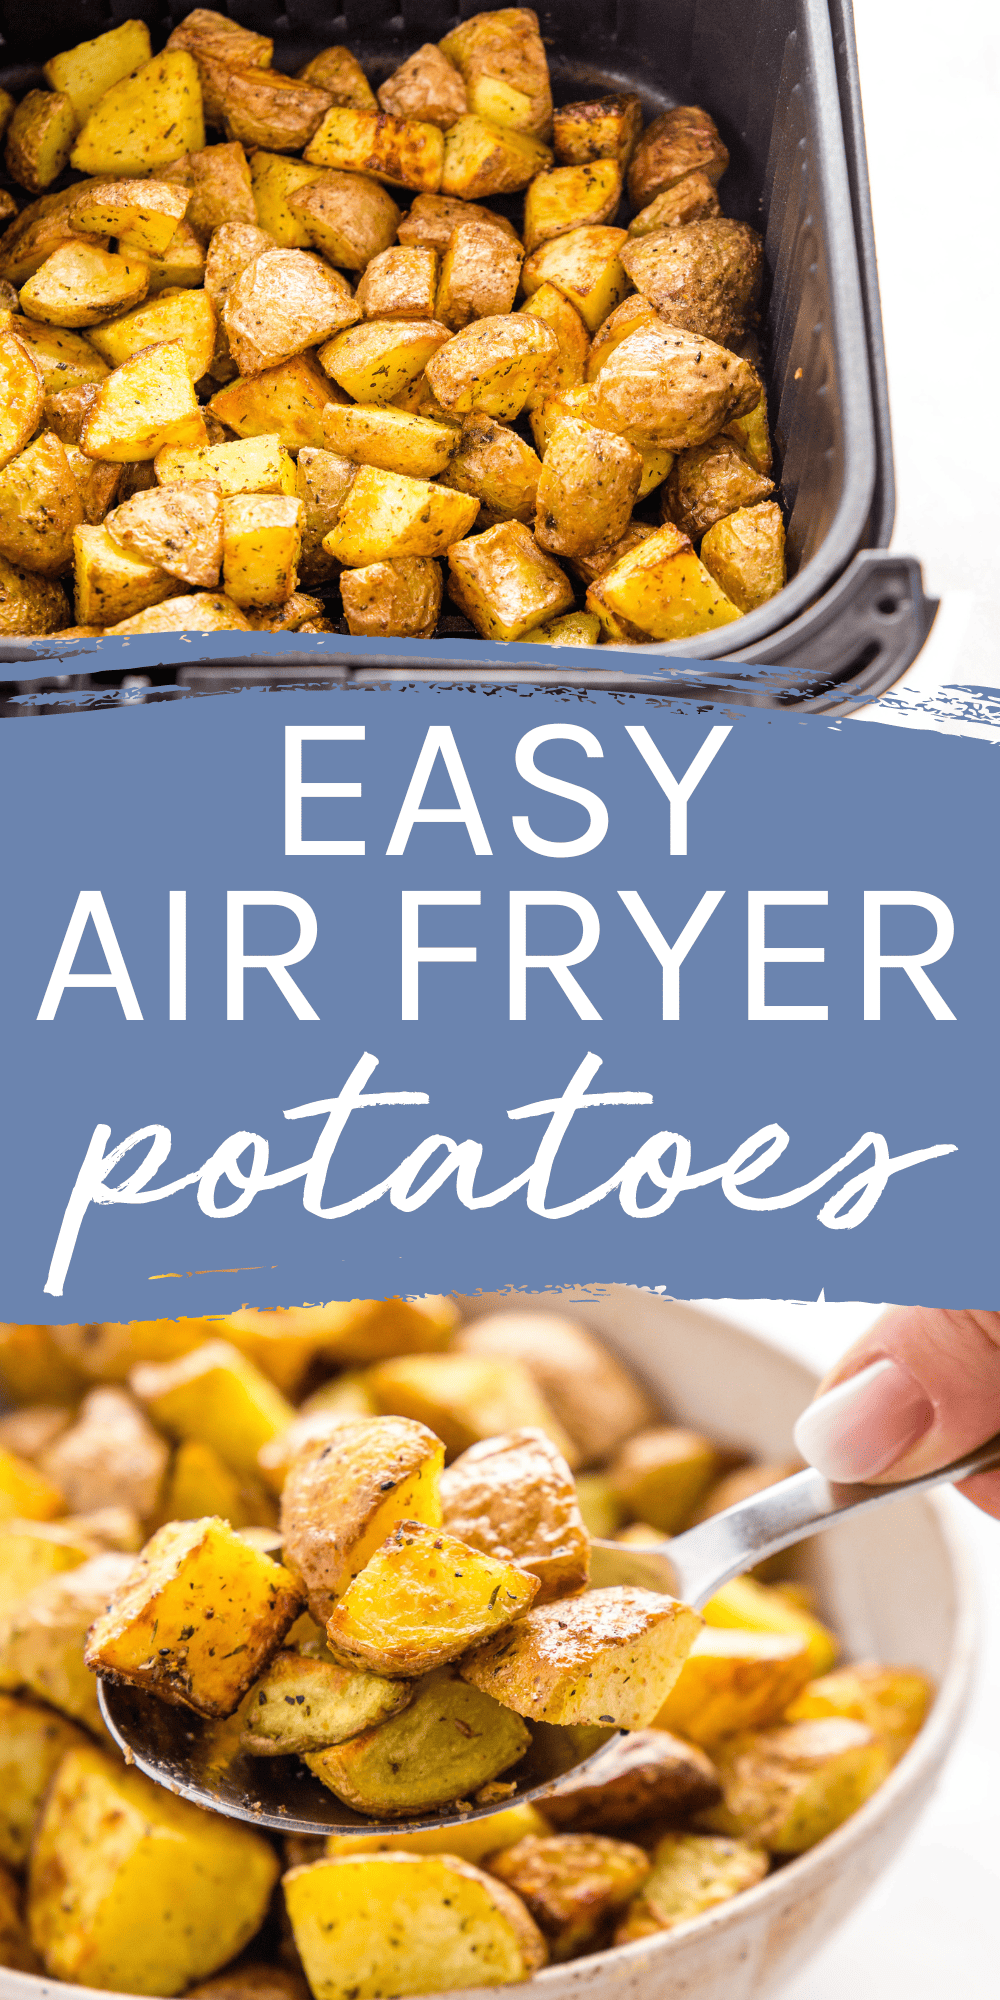 This Air Fryer Roasted Potatoes recipe is the ultimate guide to achieving the perfect air fryer roasted potatoes that are crispy on the outside and fluffy on the inside. Simple flavours and ready in 20 minutes. Roast potatoes in the air fryer, the easy way! Recipe from thebusybaker.ca! #airfryerpotatoes #roastedpotatoes #airfryerroastedpotatoes #airfryerrecipe #sidedish #airfryersidedish #airfryer #potatorecipe #potatoes via @busybakerblog